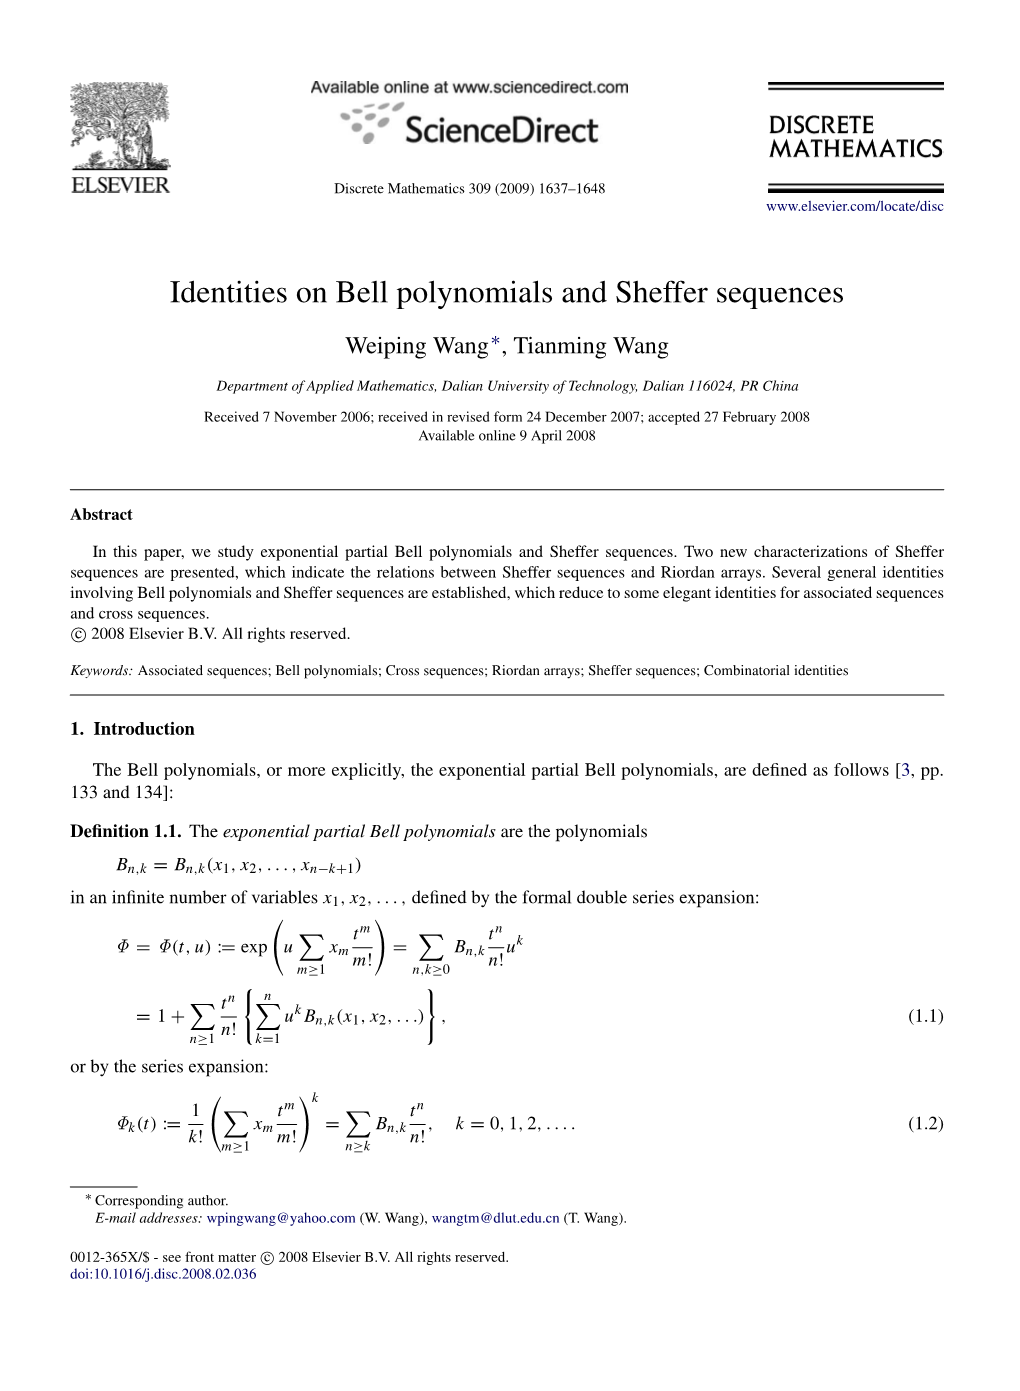 Identities on Bell Polynomials and Sheffer Sequences